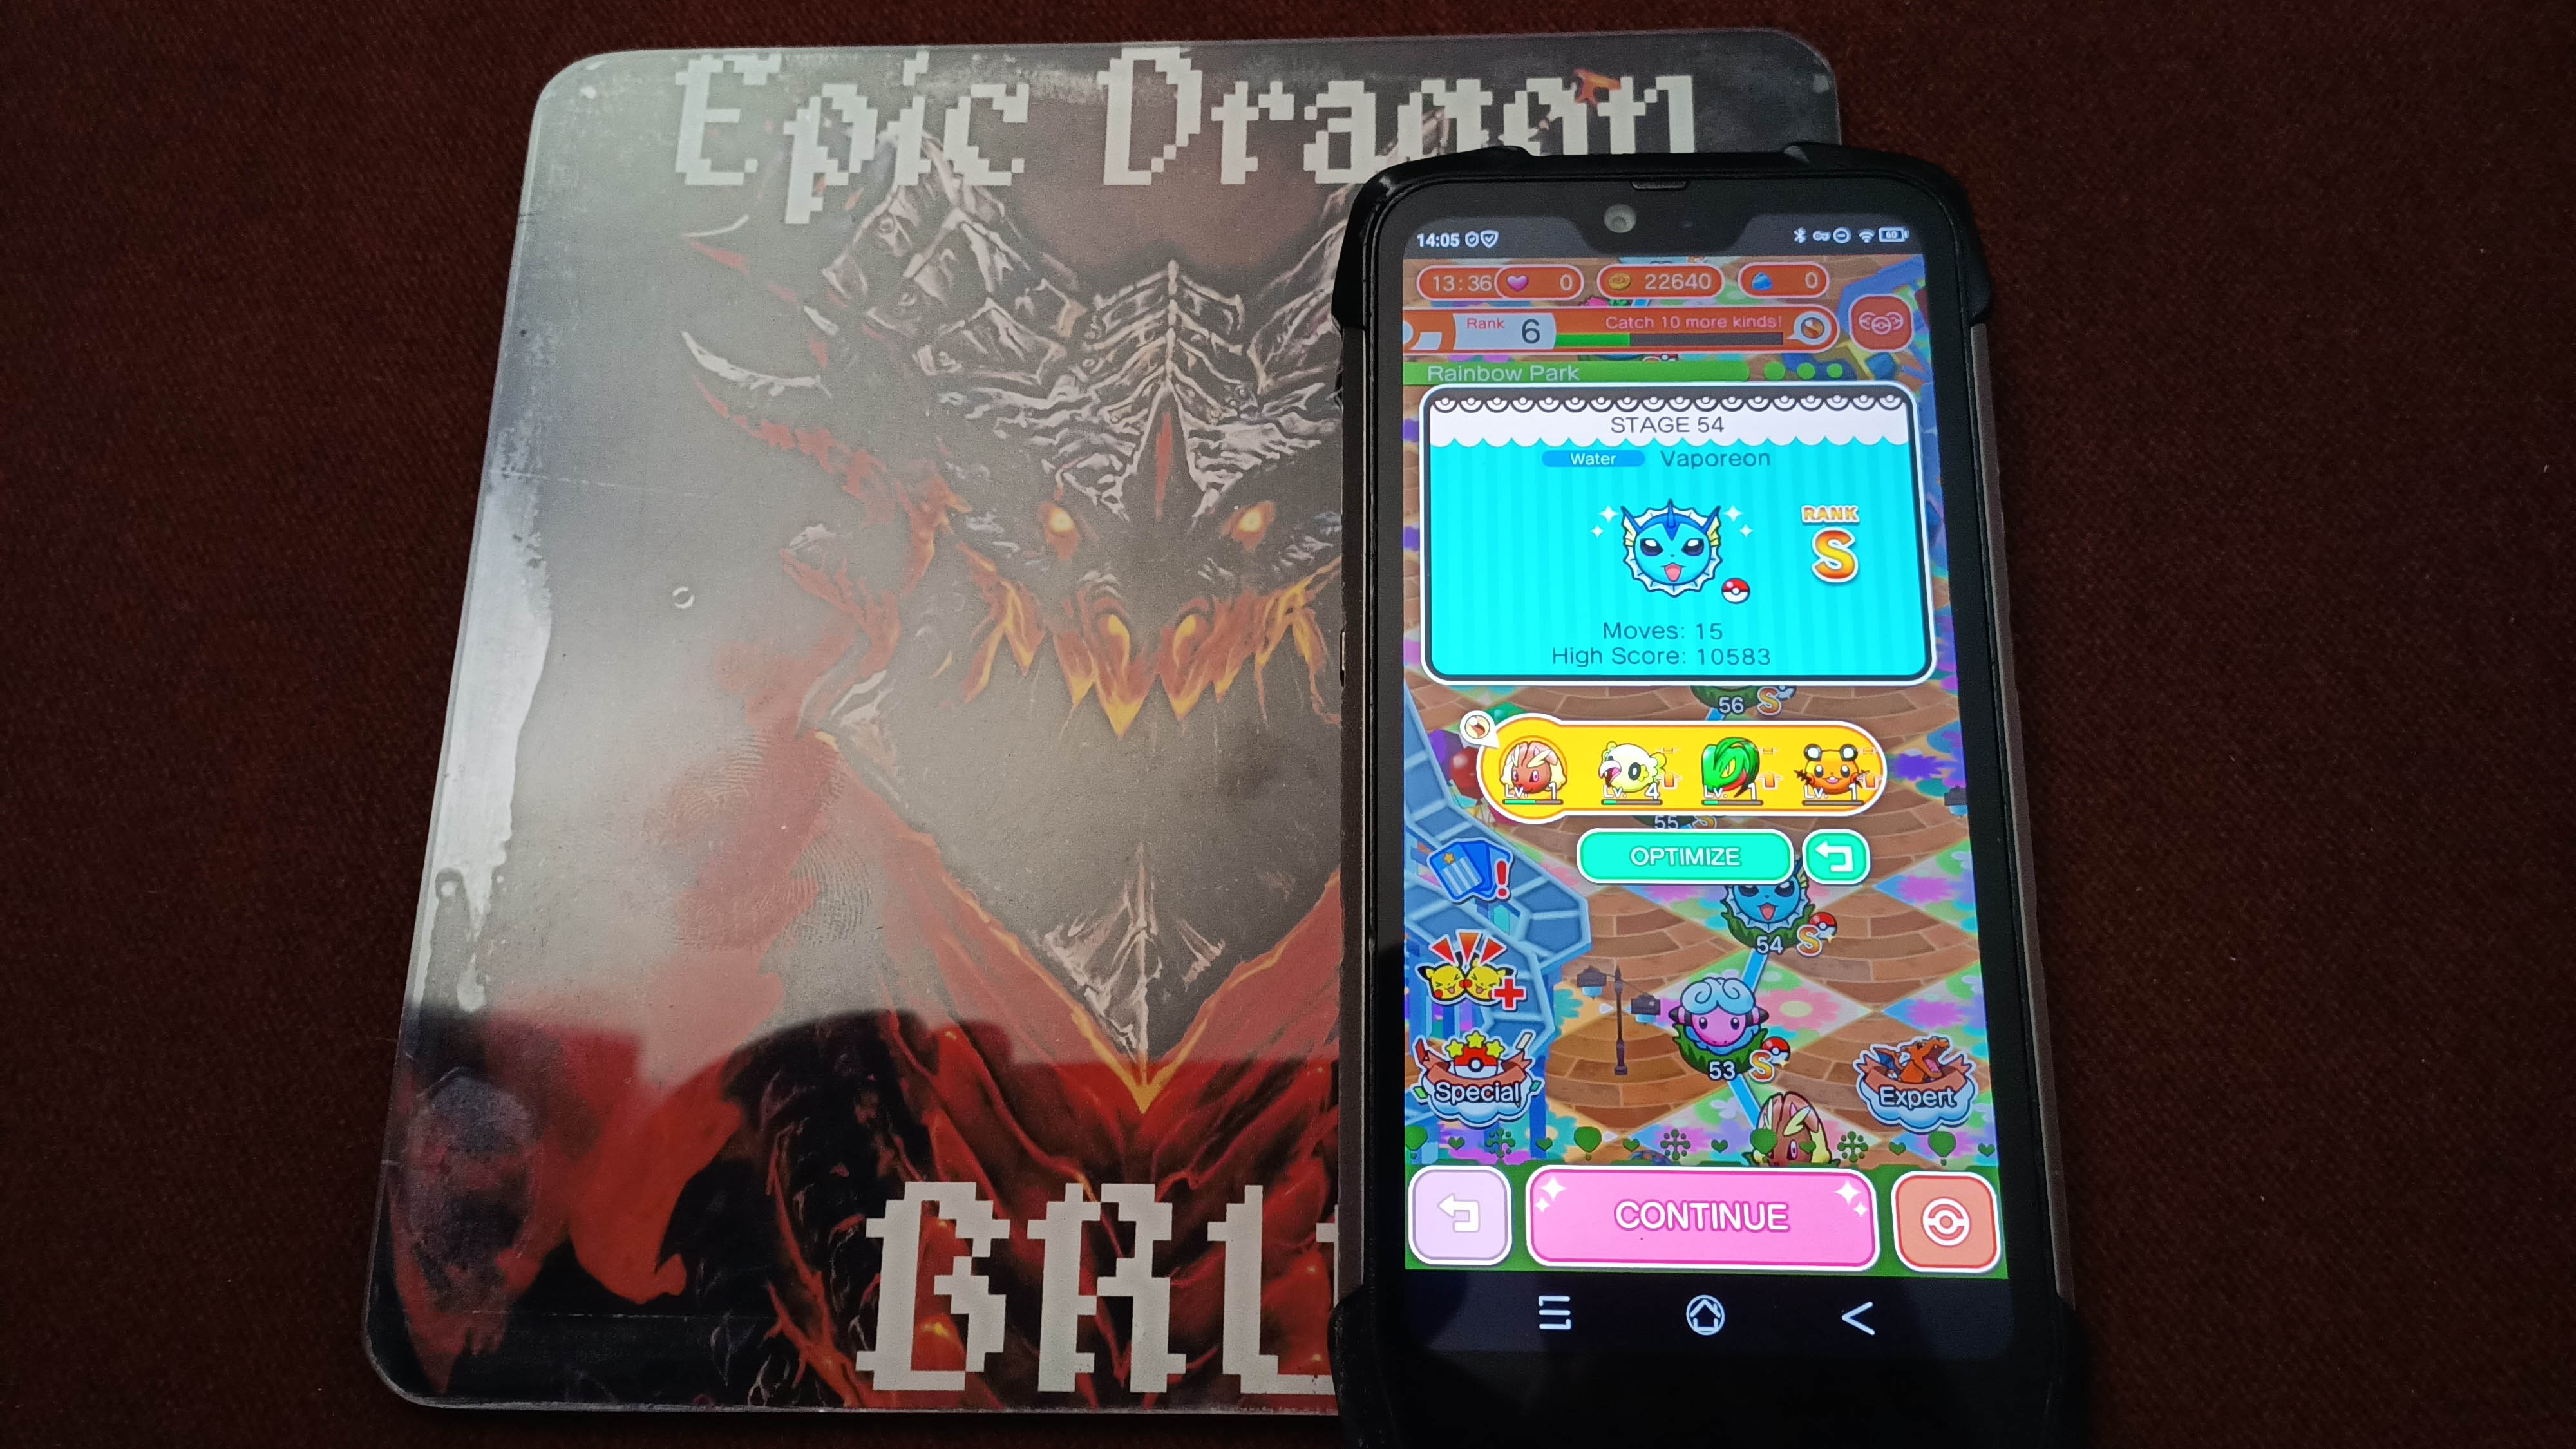 EpicDragon: Pokemon Shuffle Mobile: Stage 054 (Android) 10,583 points on 2022-09-14 16:32:14